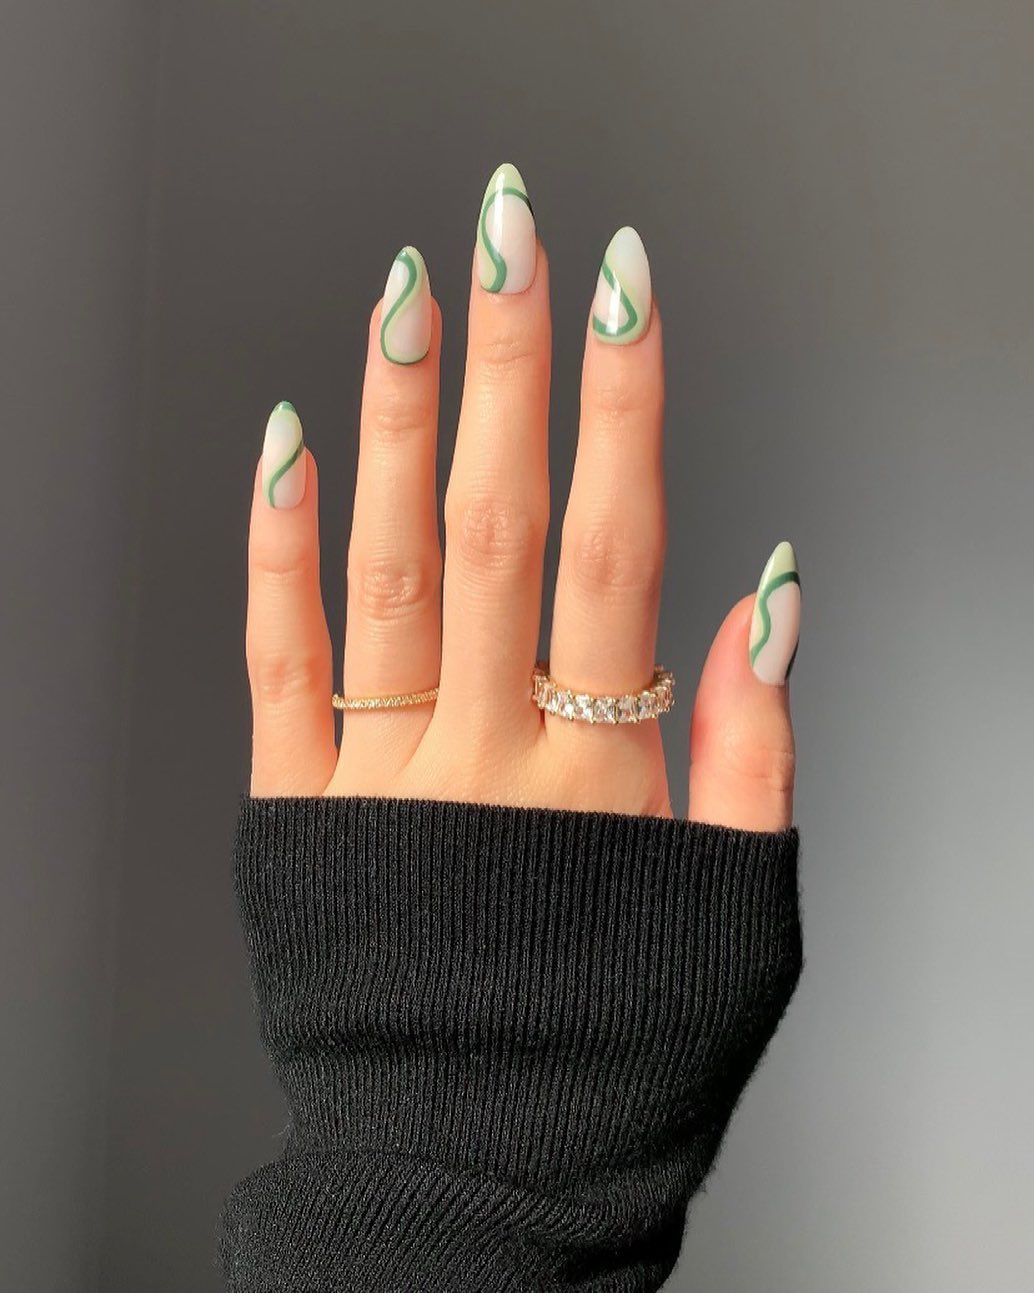 Sage Green Nails With Lines